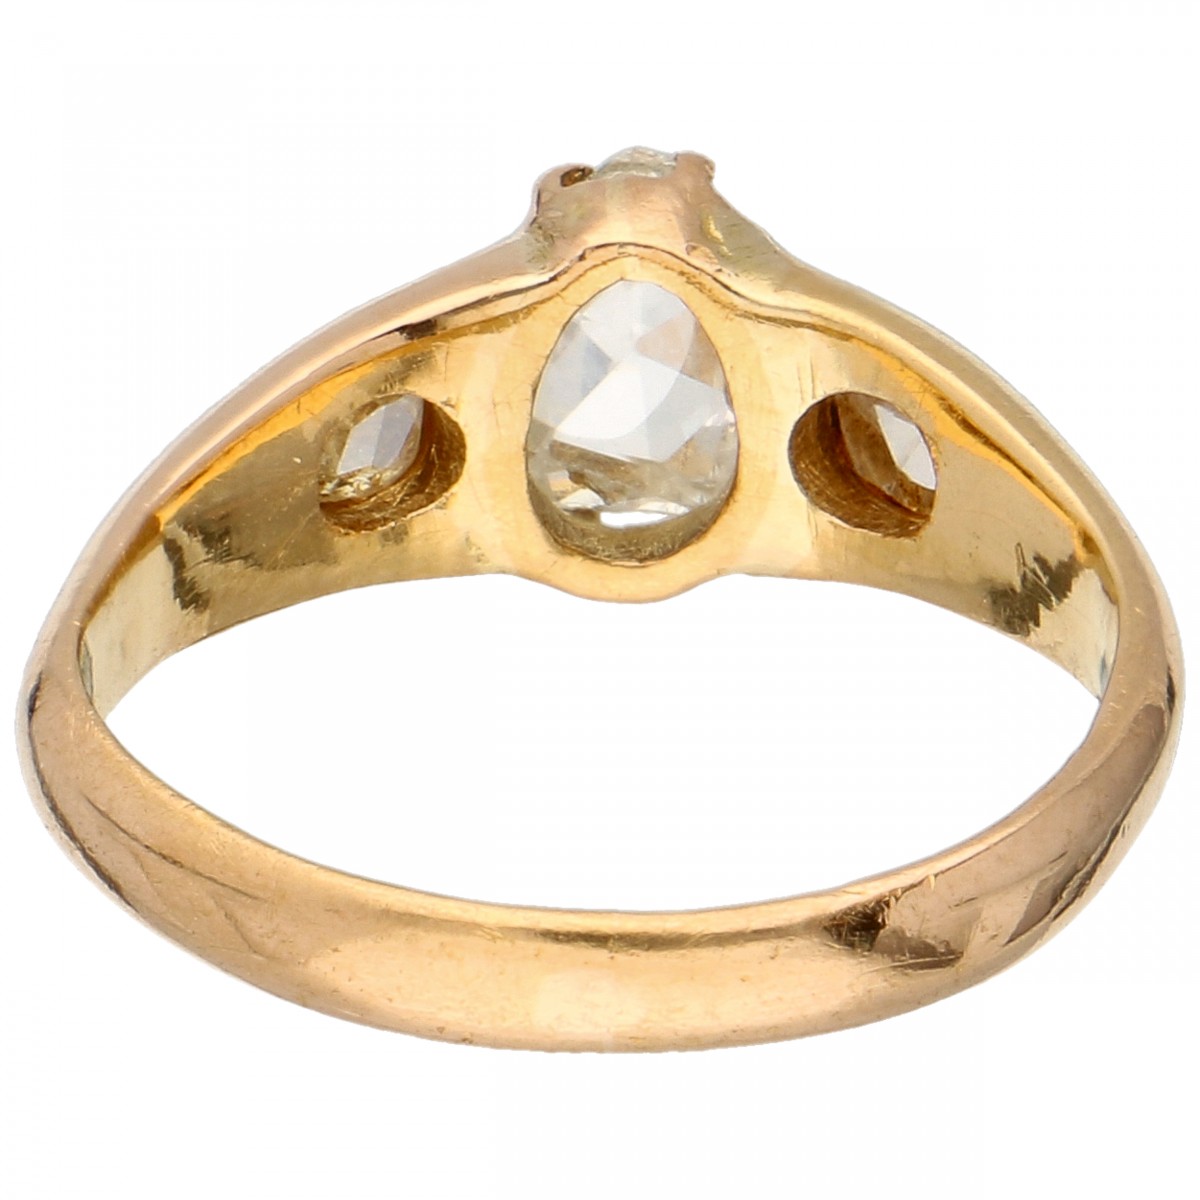 Yellow gold three-stone ring set with rose cut diamonds - 18 ct. - Image 3 of 3